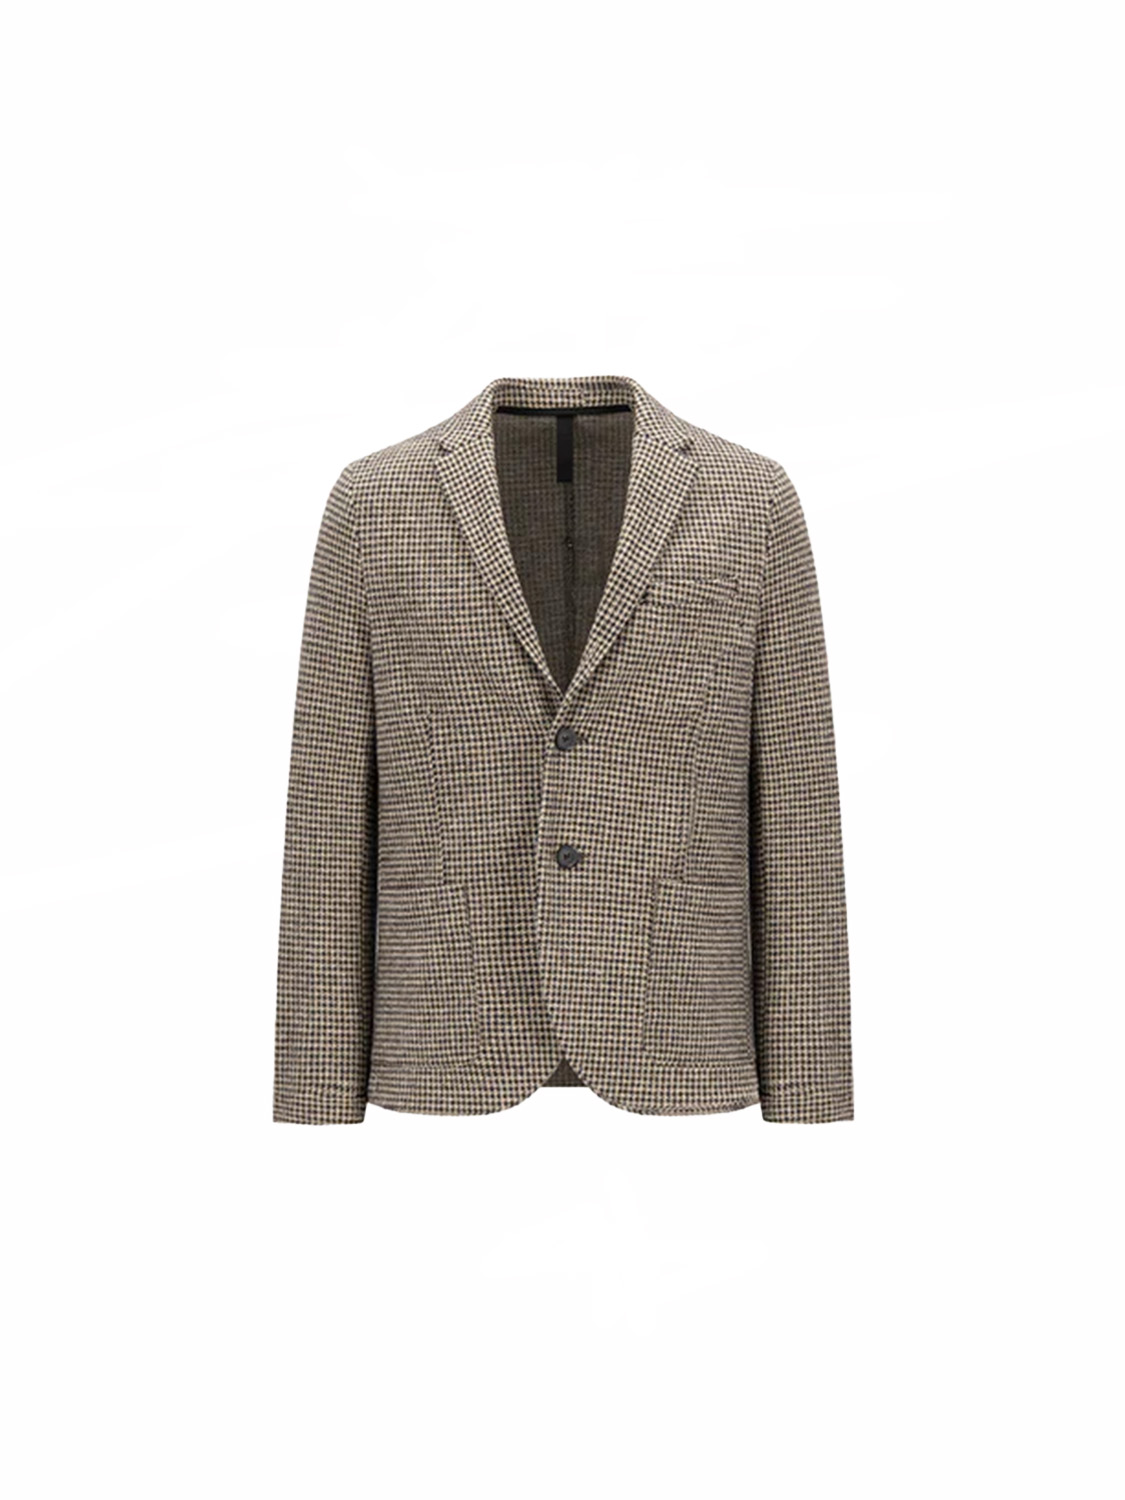 Blazer made from a patterned wool and cotton blend 